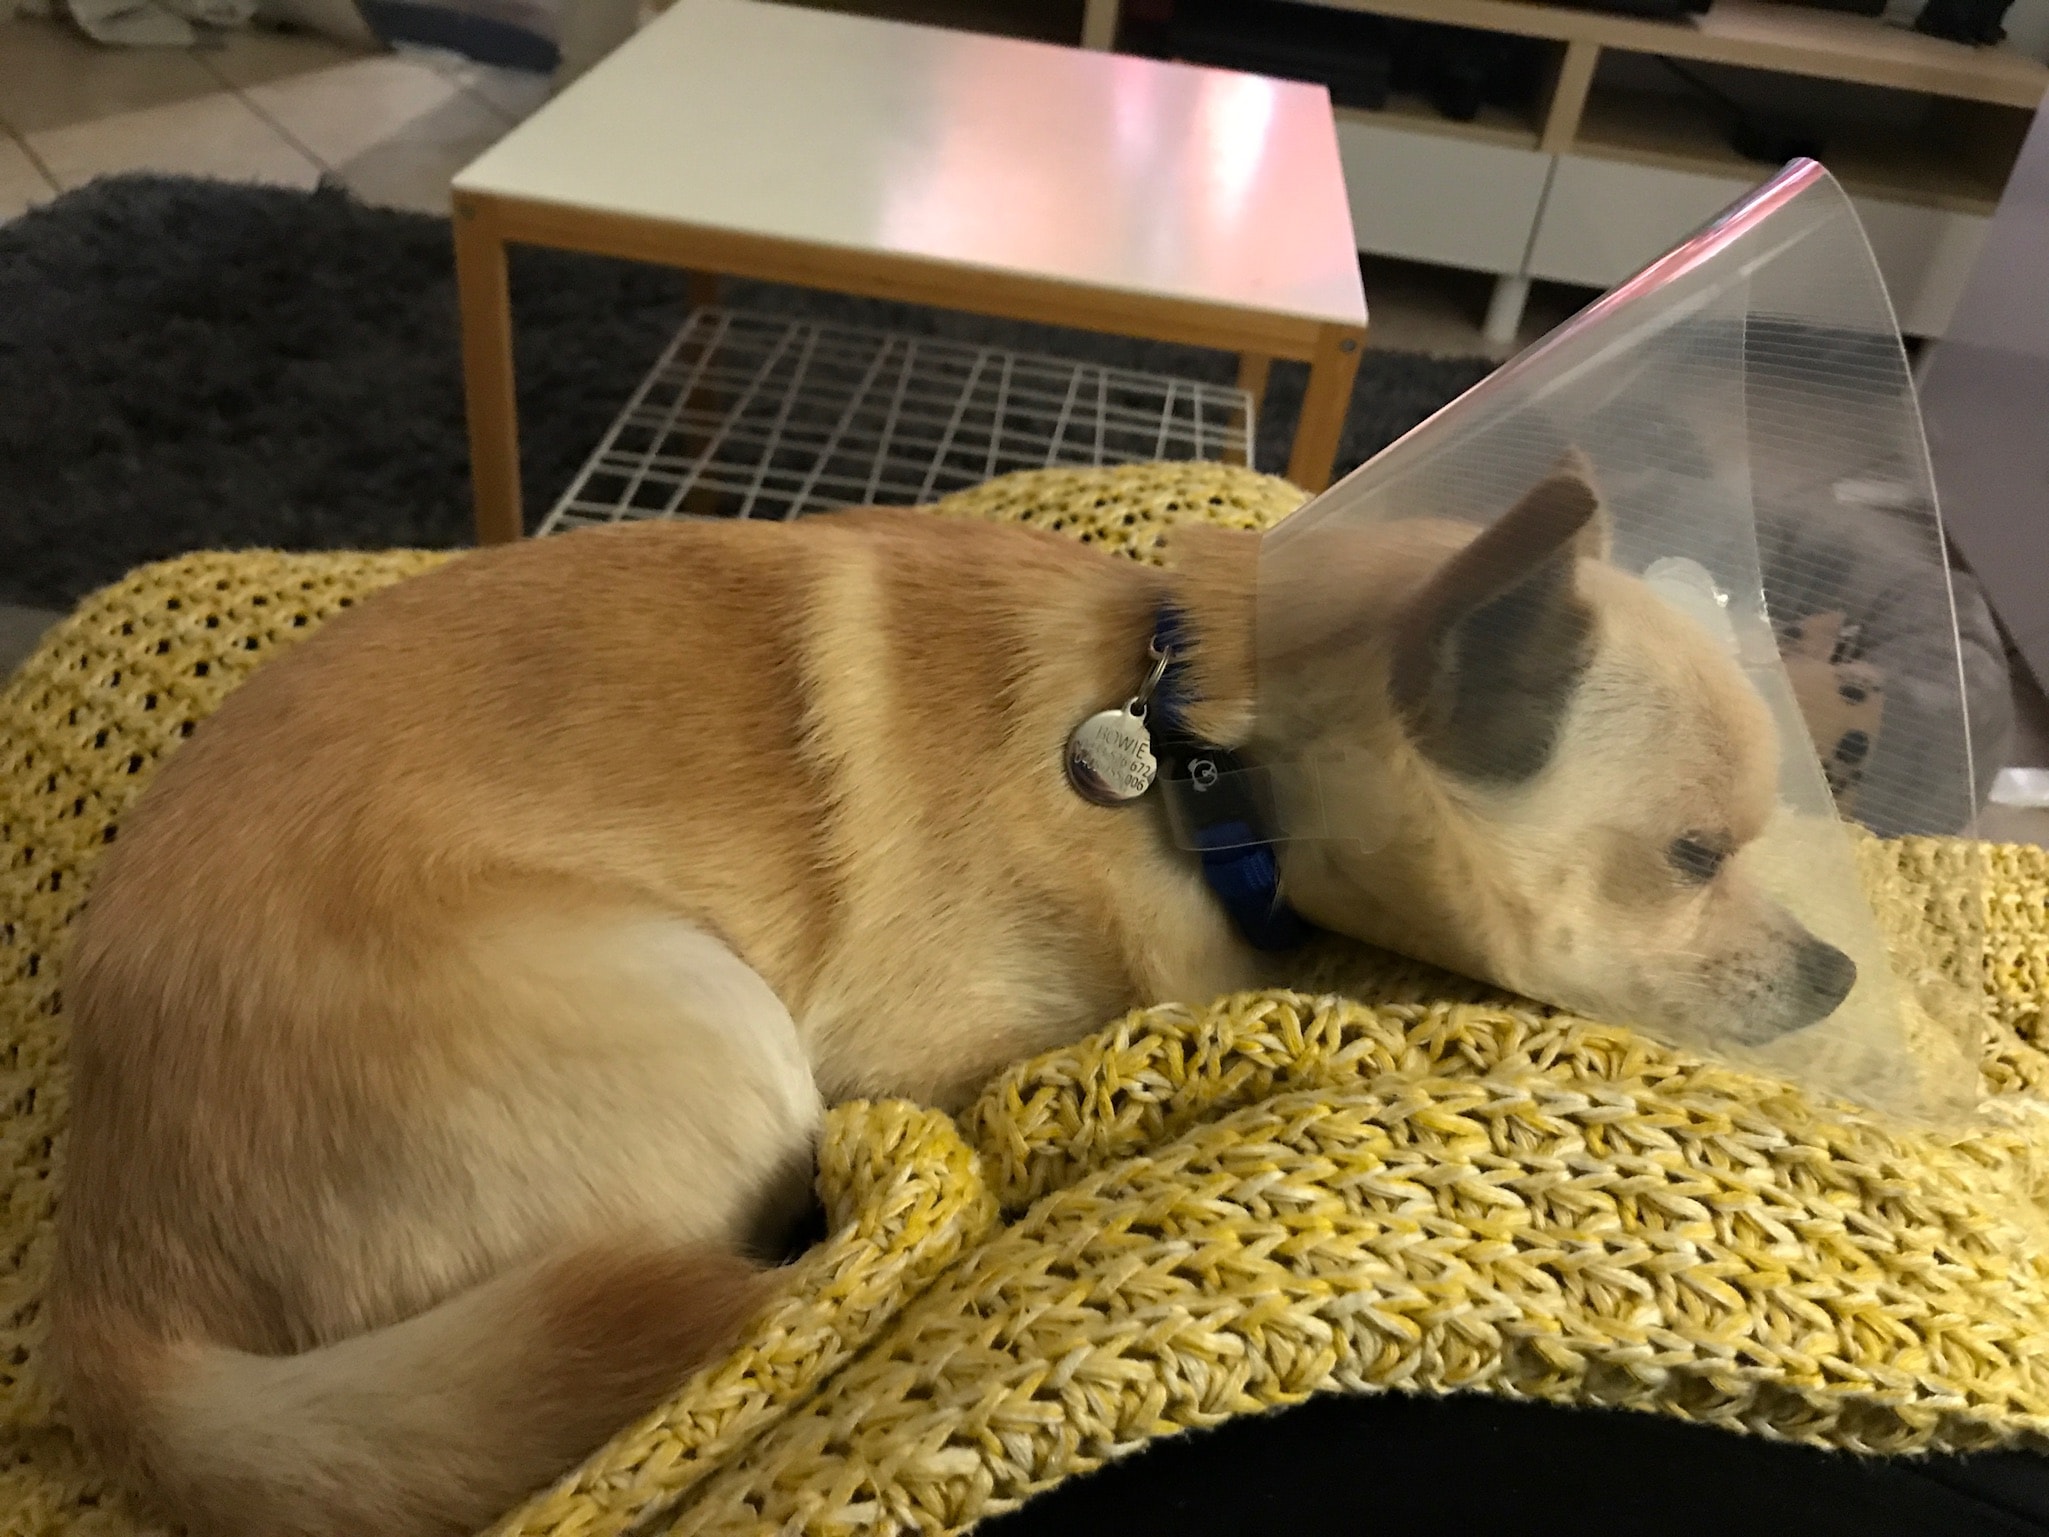 what is the cone around a dogs neck for